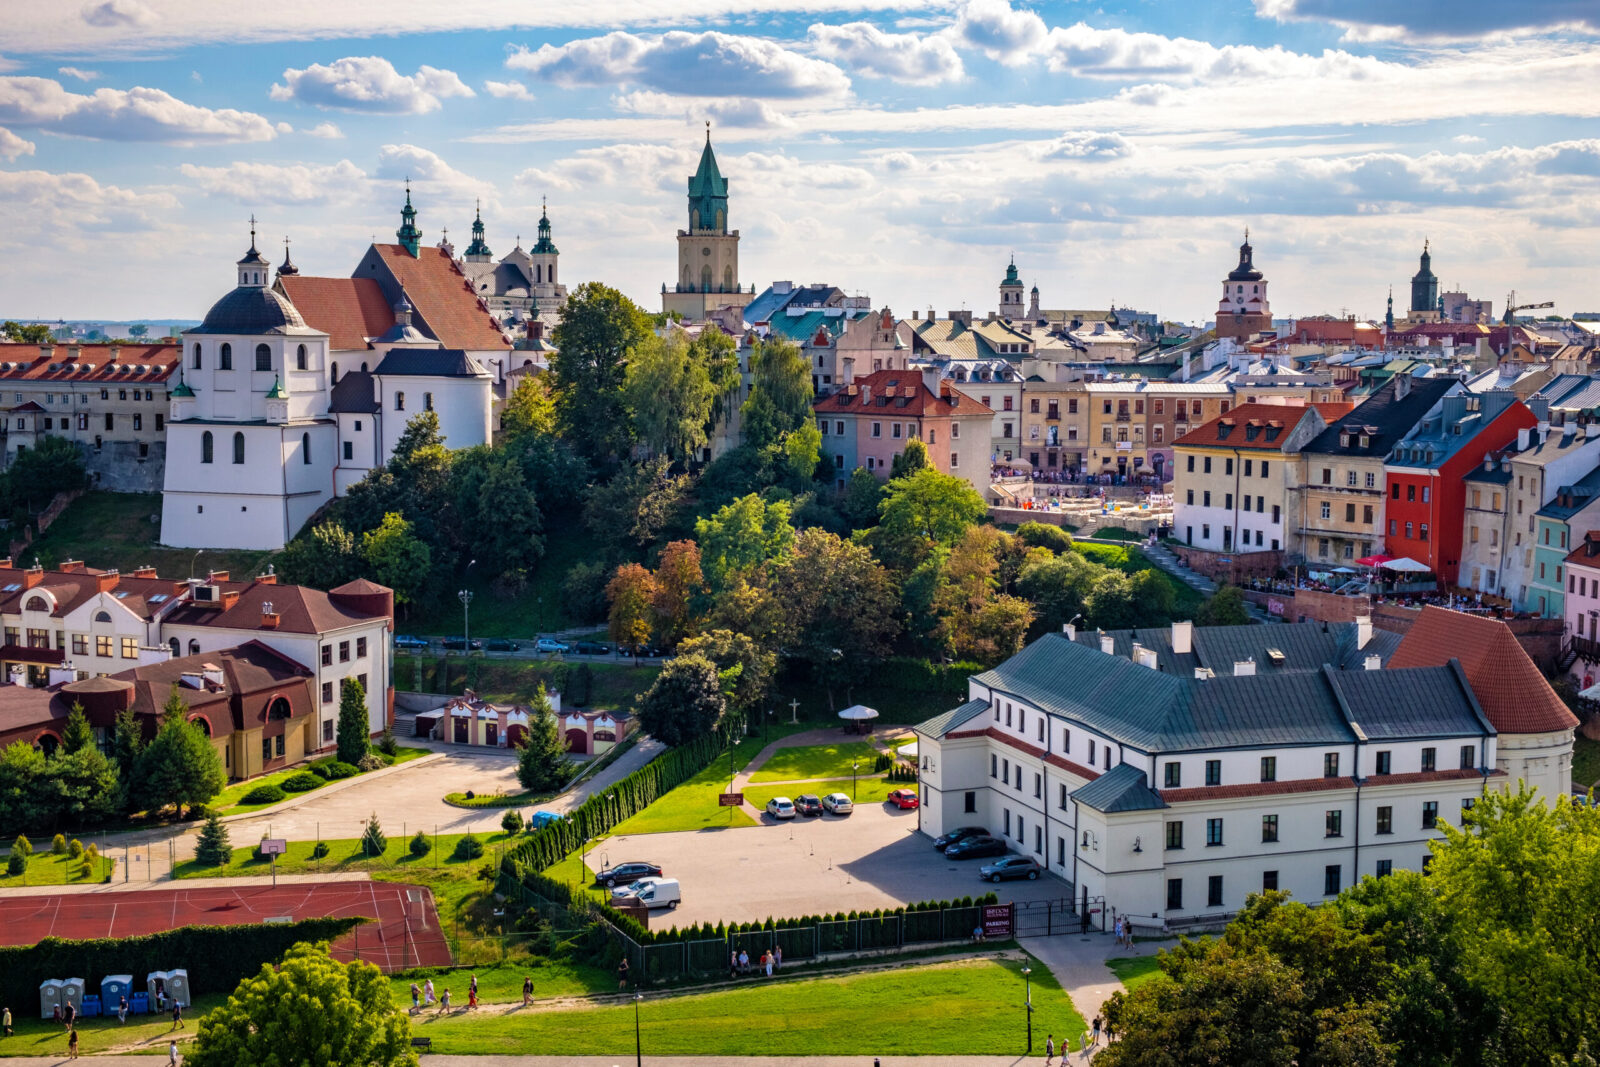 Poland Tour Packages - Book honeymoon ,family,adventure tour packages to Poland |Travel Knits